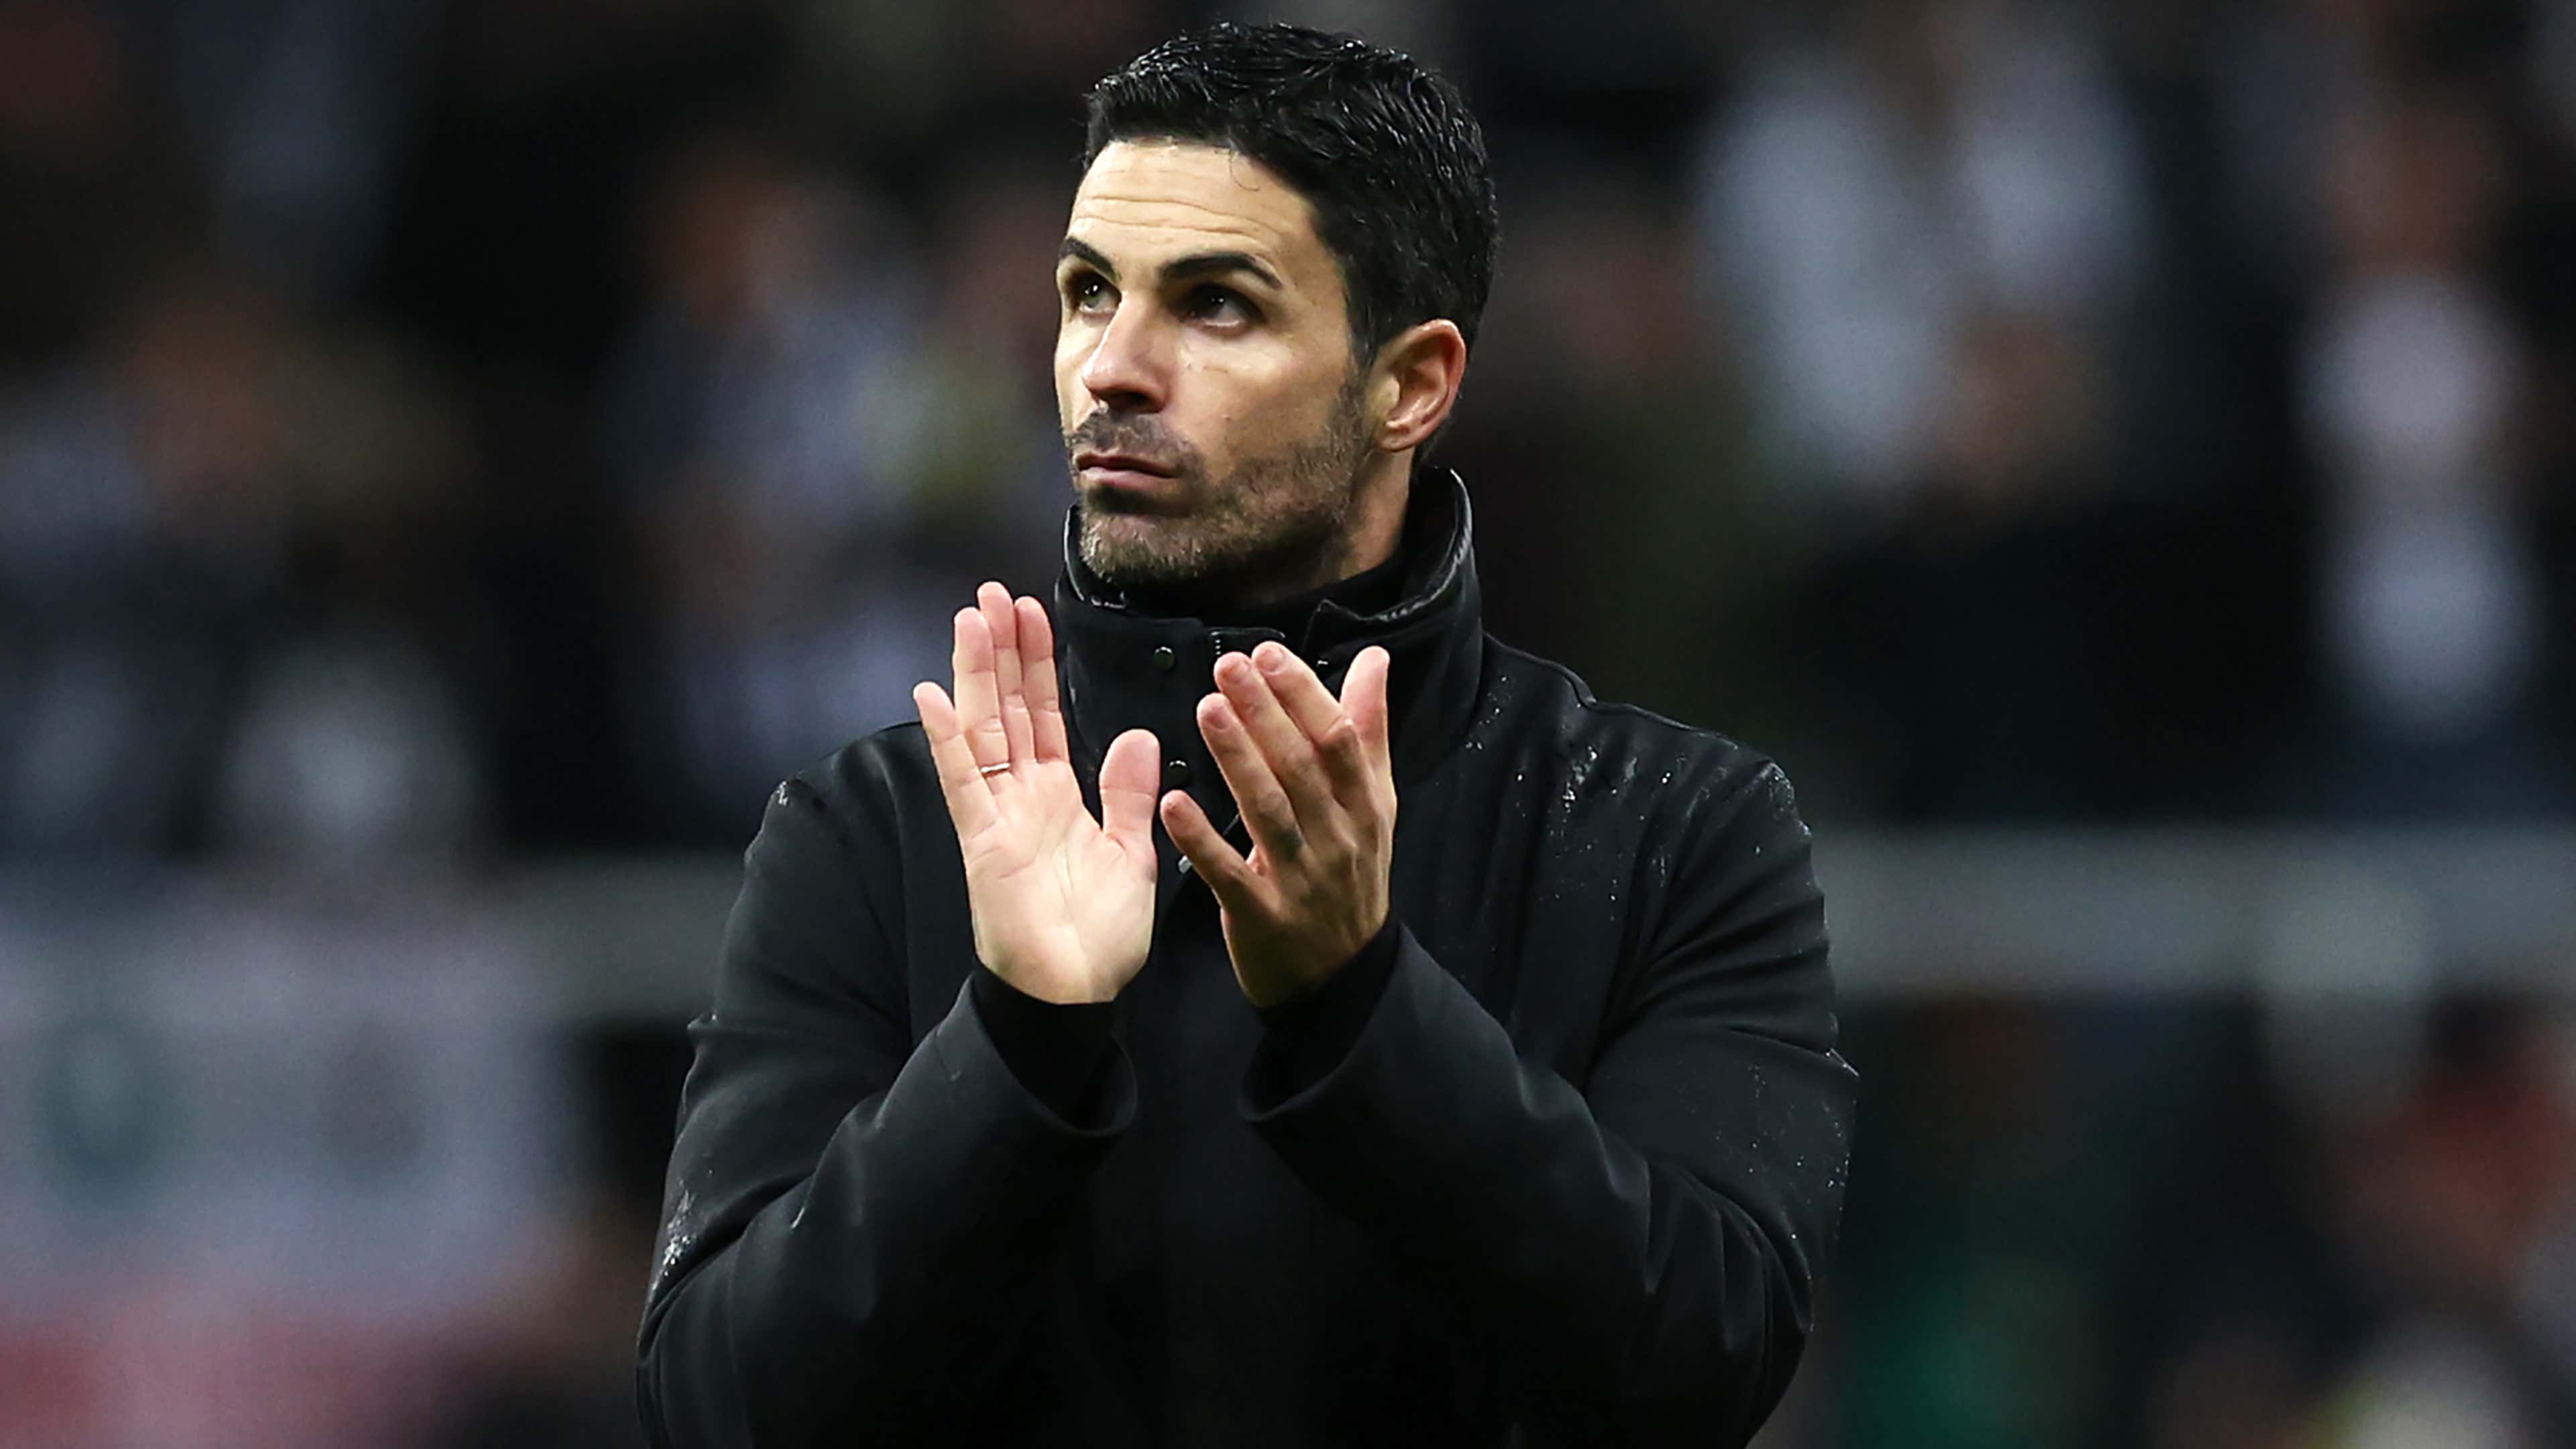 FA make liên hệ with Mikel Arteta and Arsenal over VAR tantrum ahead of possible charge for breaching rules - Bóng Đá